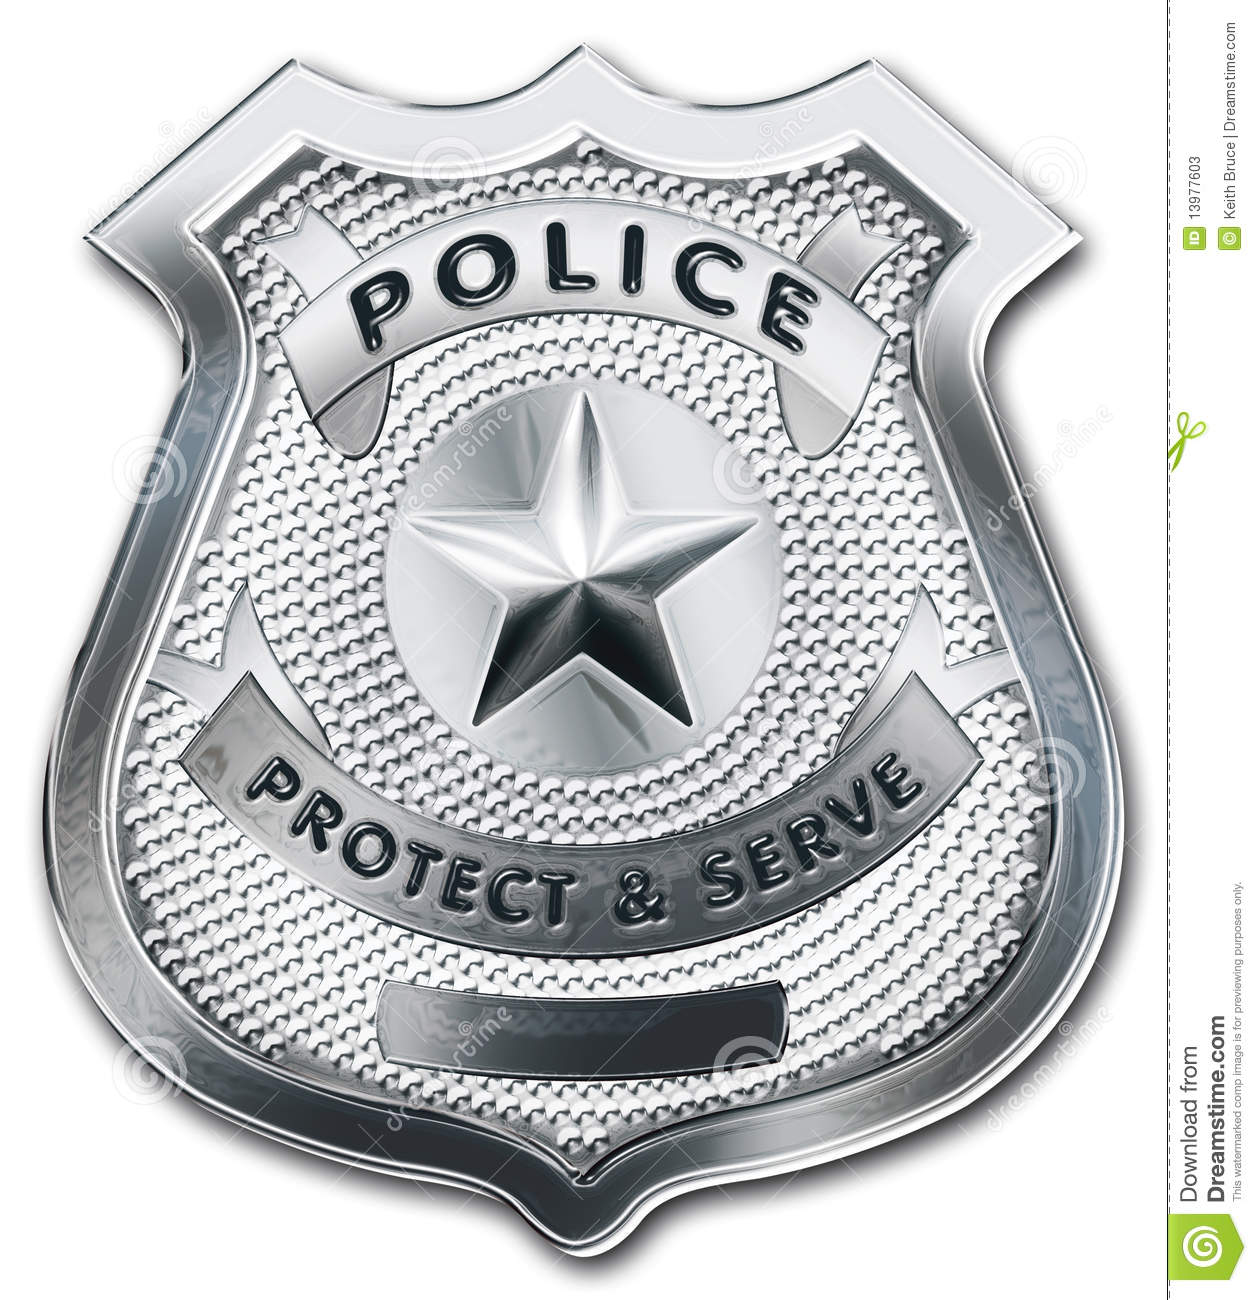 Shiny Metallic Police Officer Badge  Clipping Path Included 